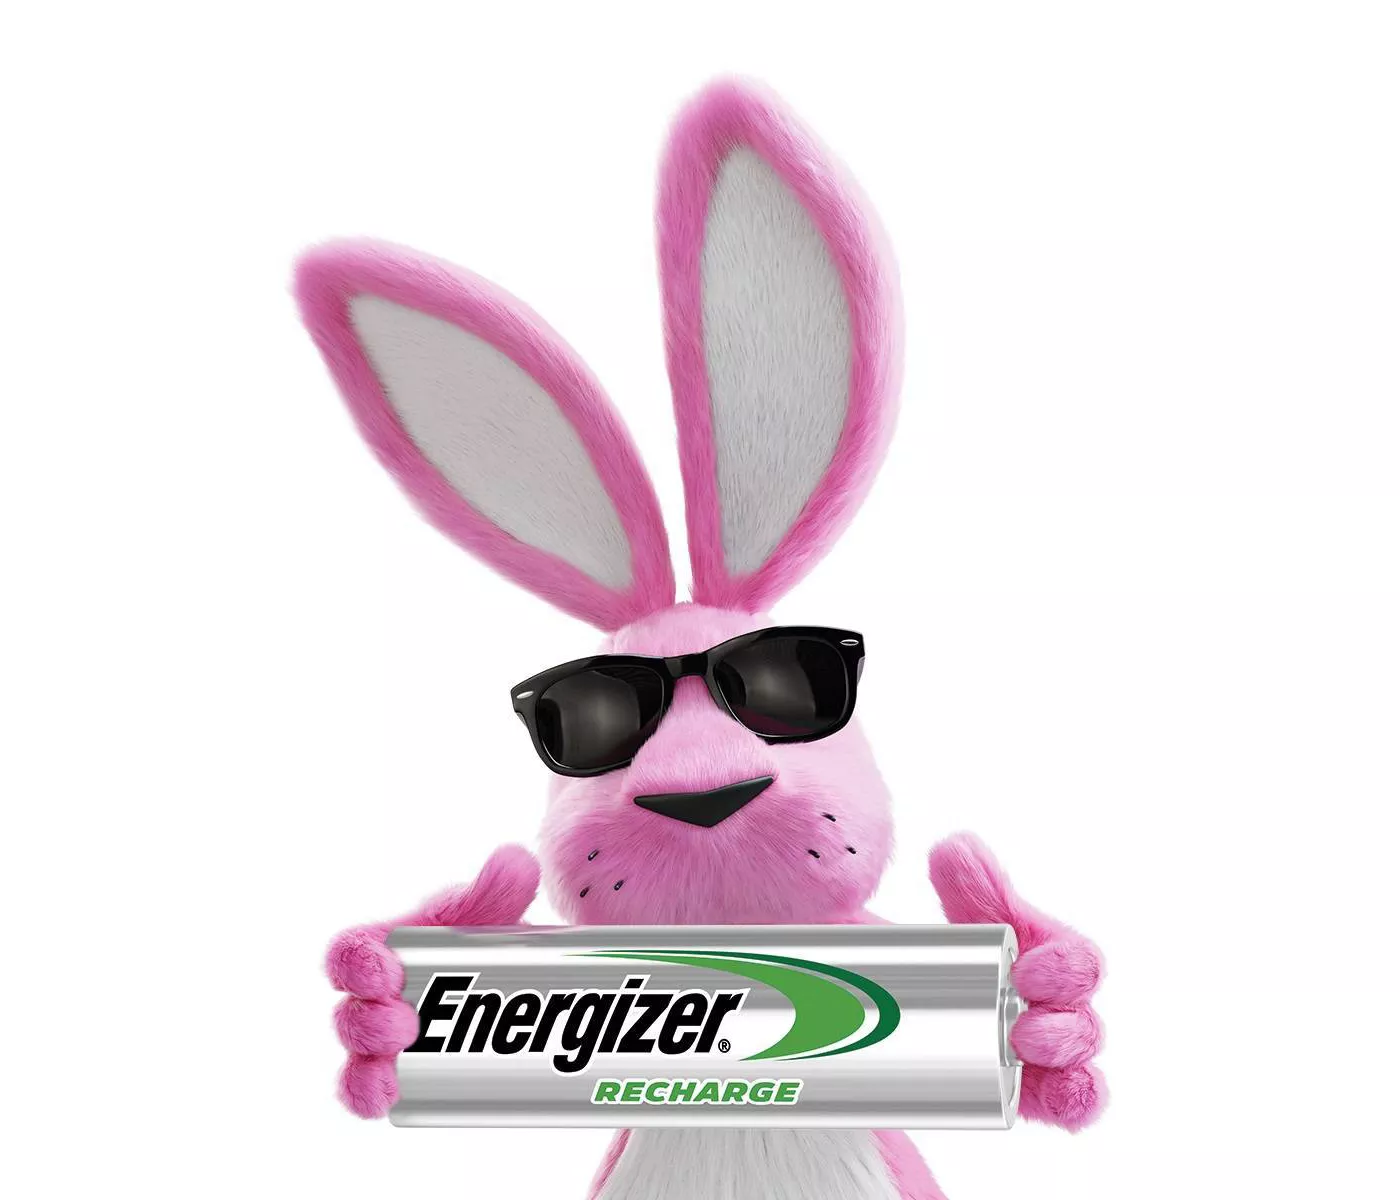 Energizer 4pk Recharge Power Plus Rechargeable AA Batteries - image 2 of 5